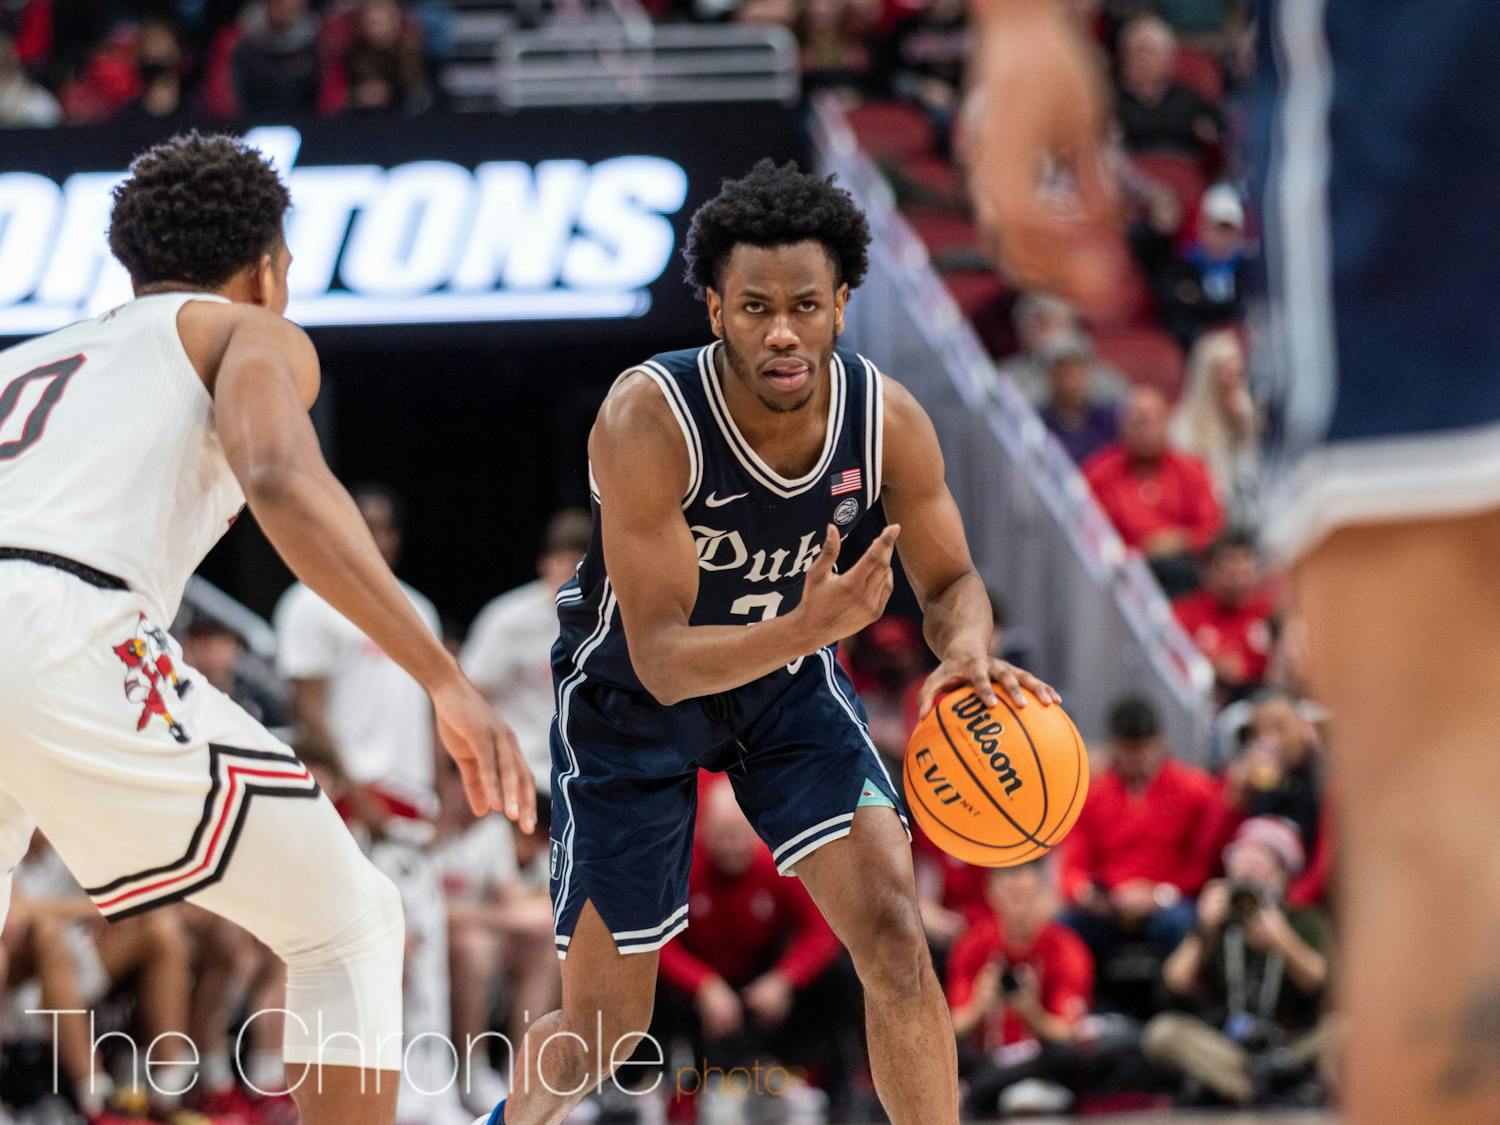 Duke Men's Basketball traveled to Louisville, KY to face the Cardinals at the KFC Yum! Center. While a tight game for the first half, the Blue Devils took the win 74-65.&nbsp;